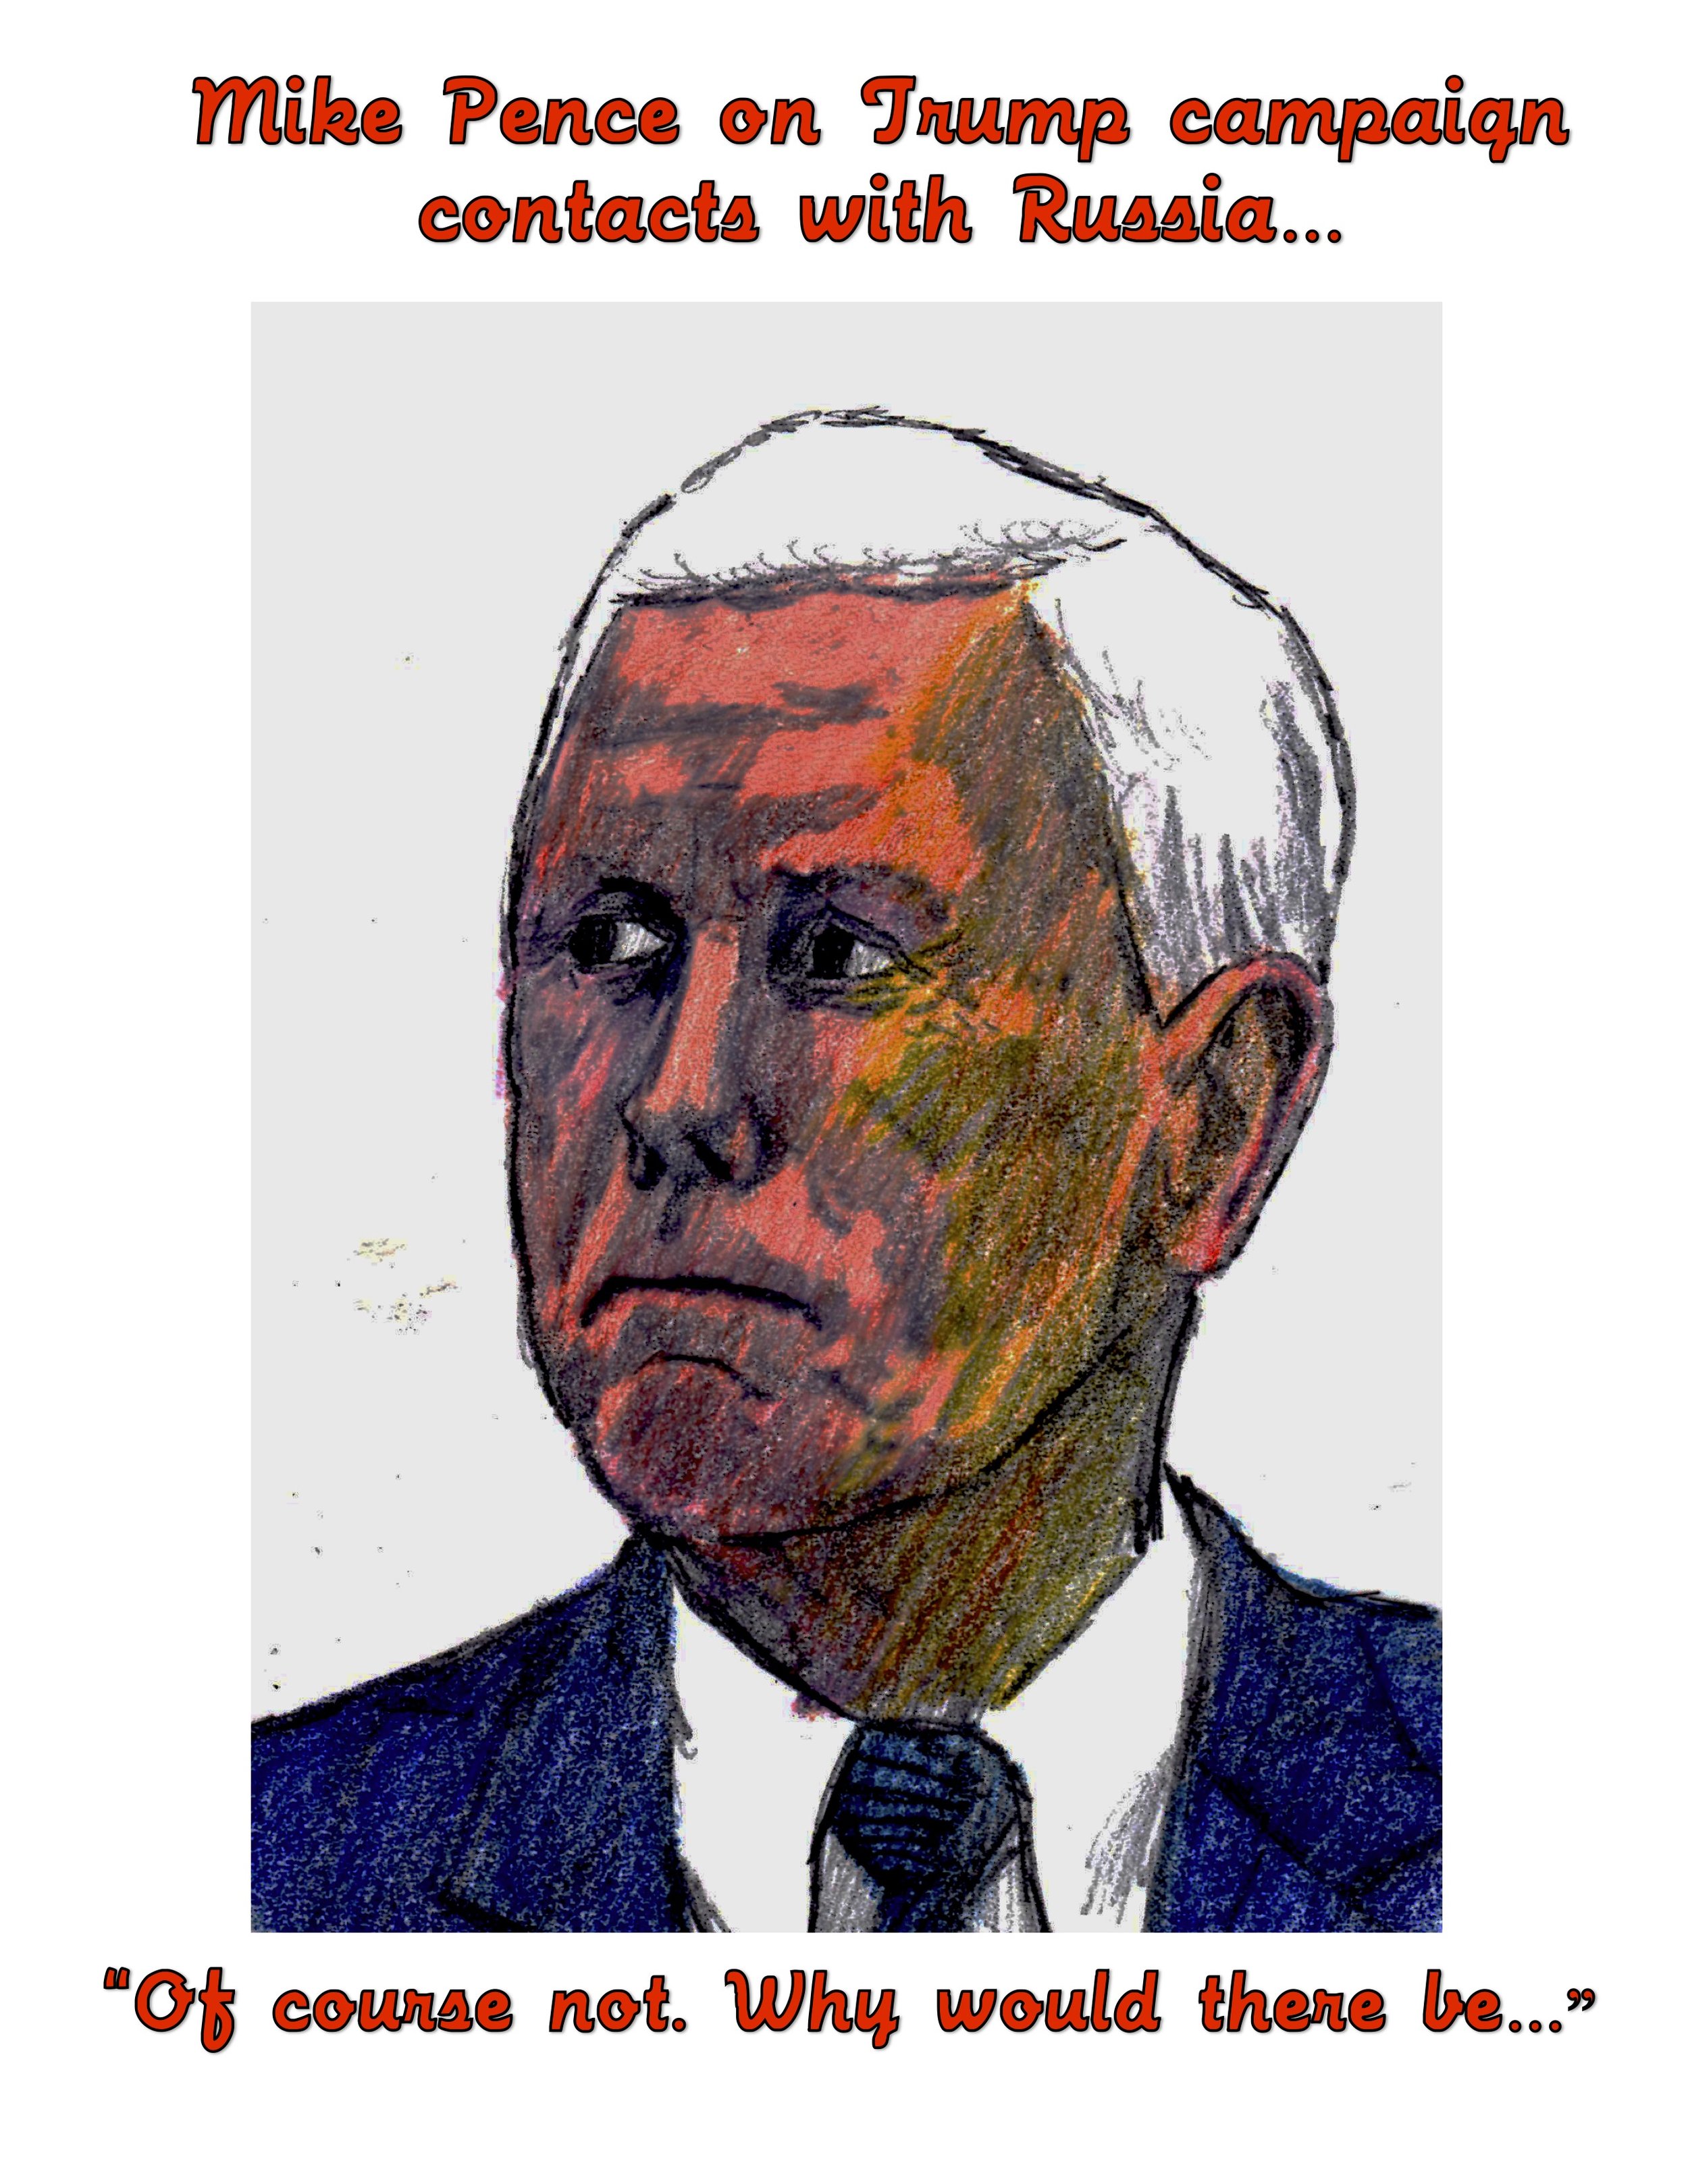 MikePence.jpg